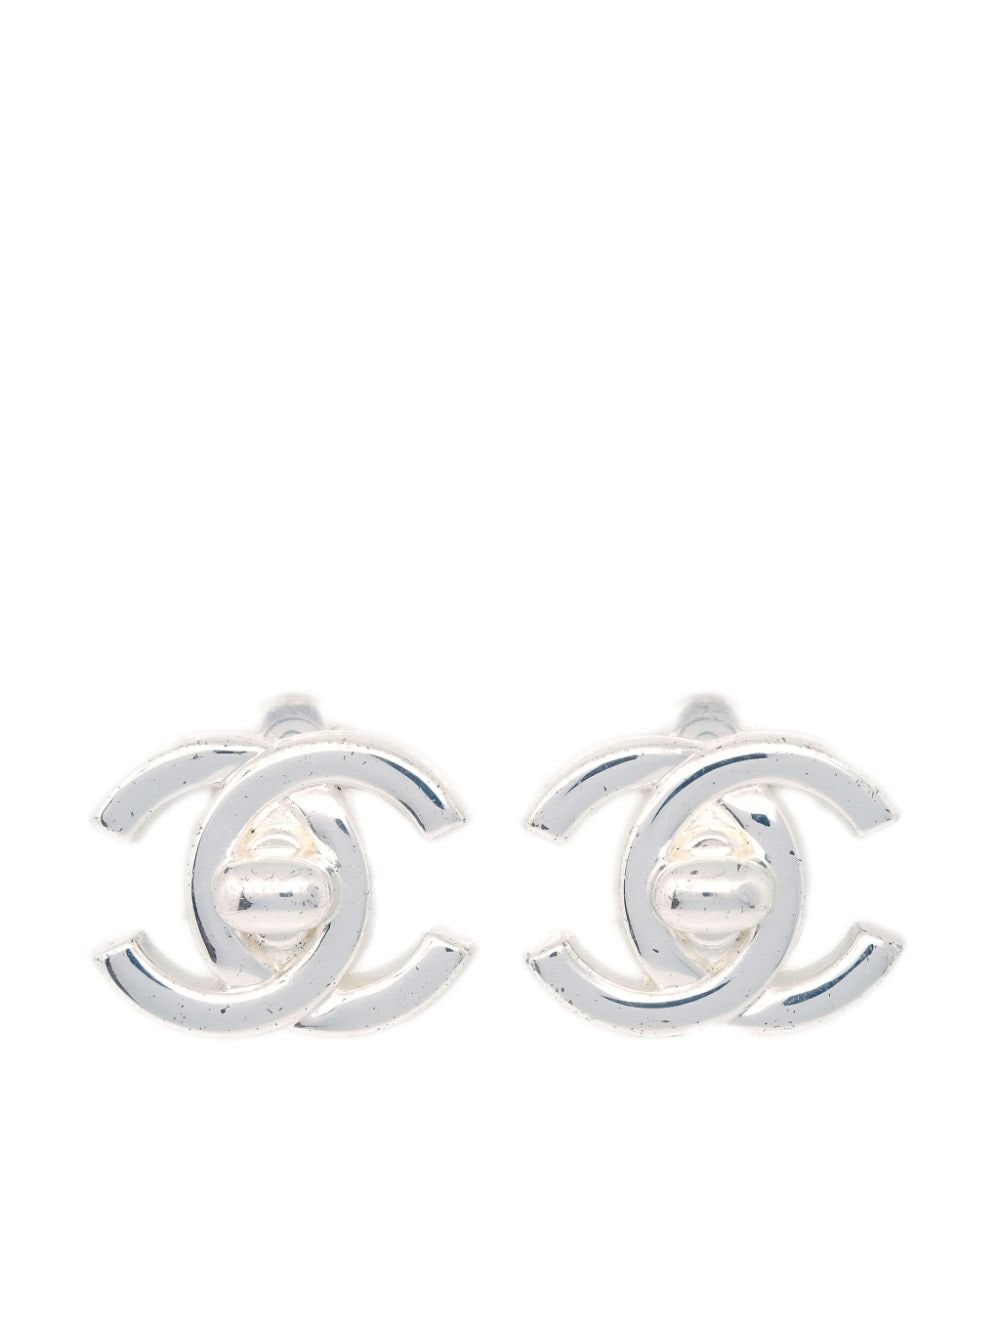 Pre-owned Chanel 1997 Silver Plated Cc Turnlock Clip-on Earrings